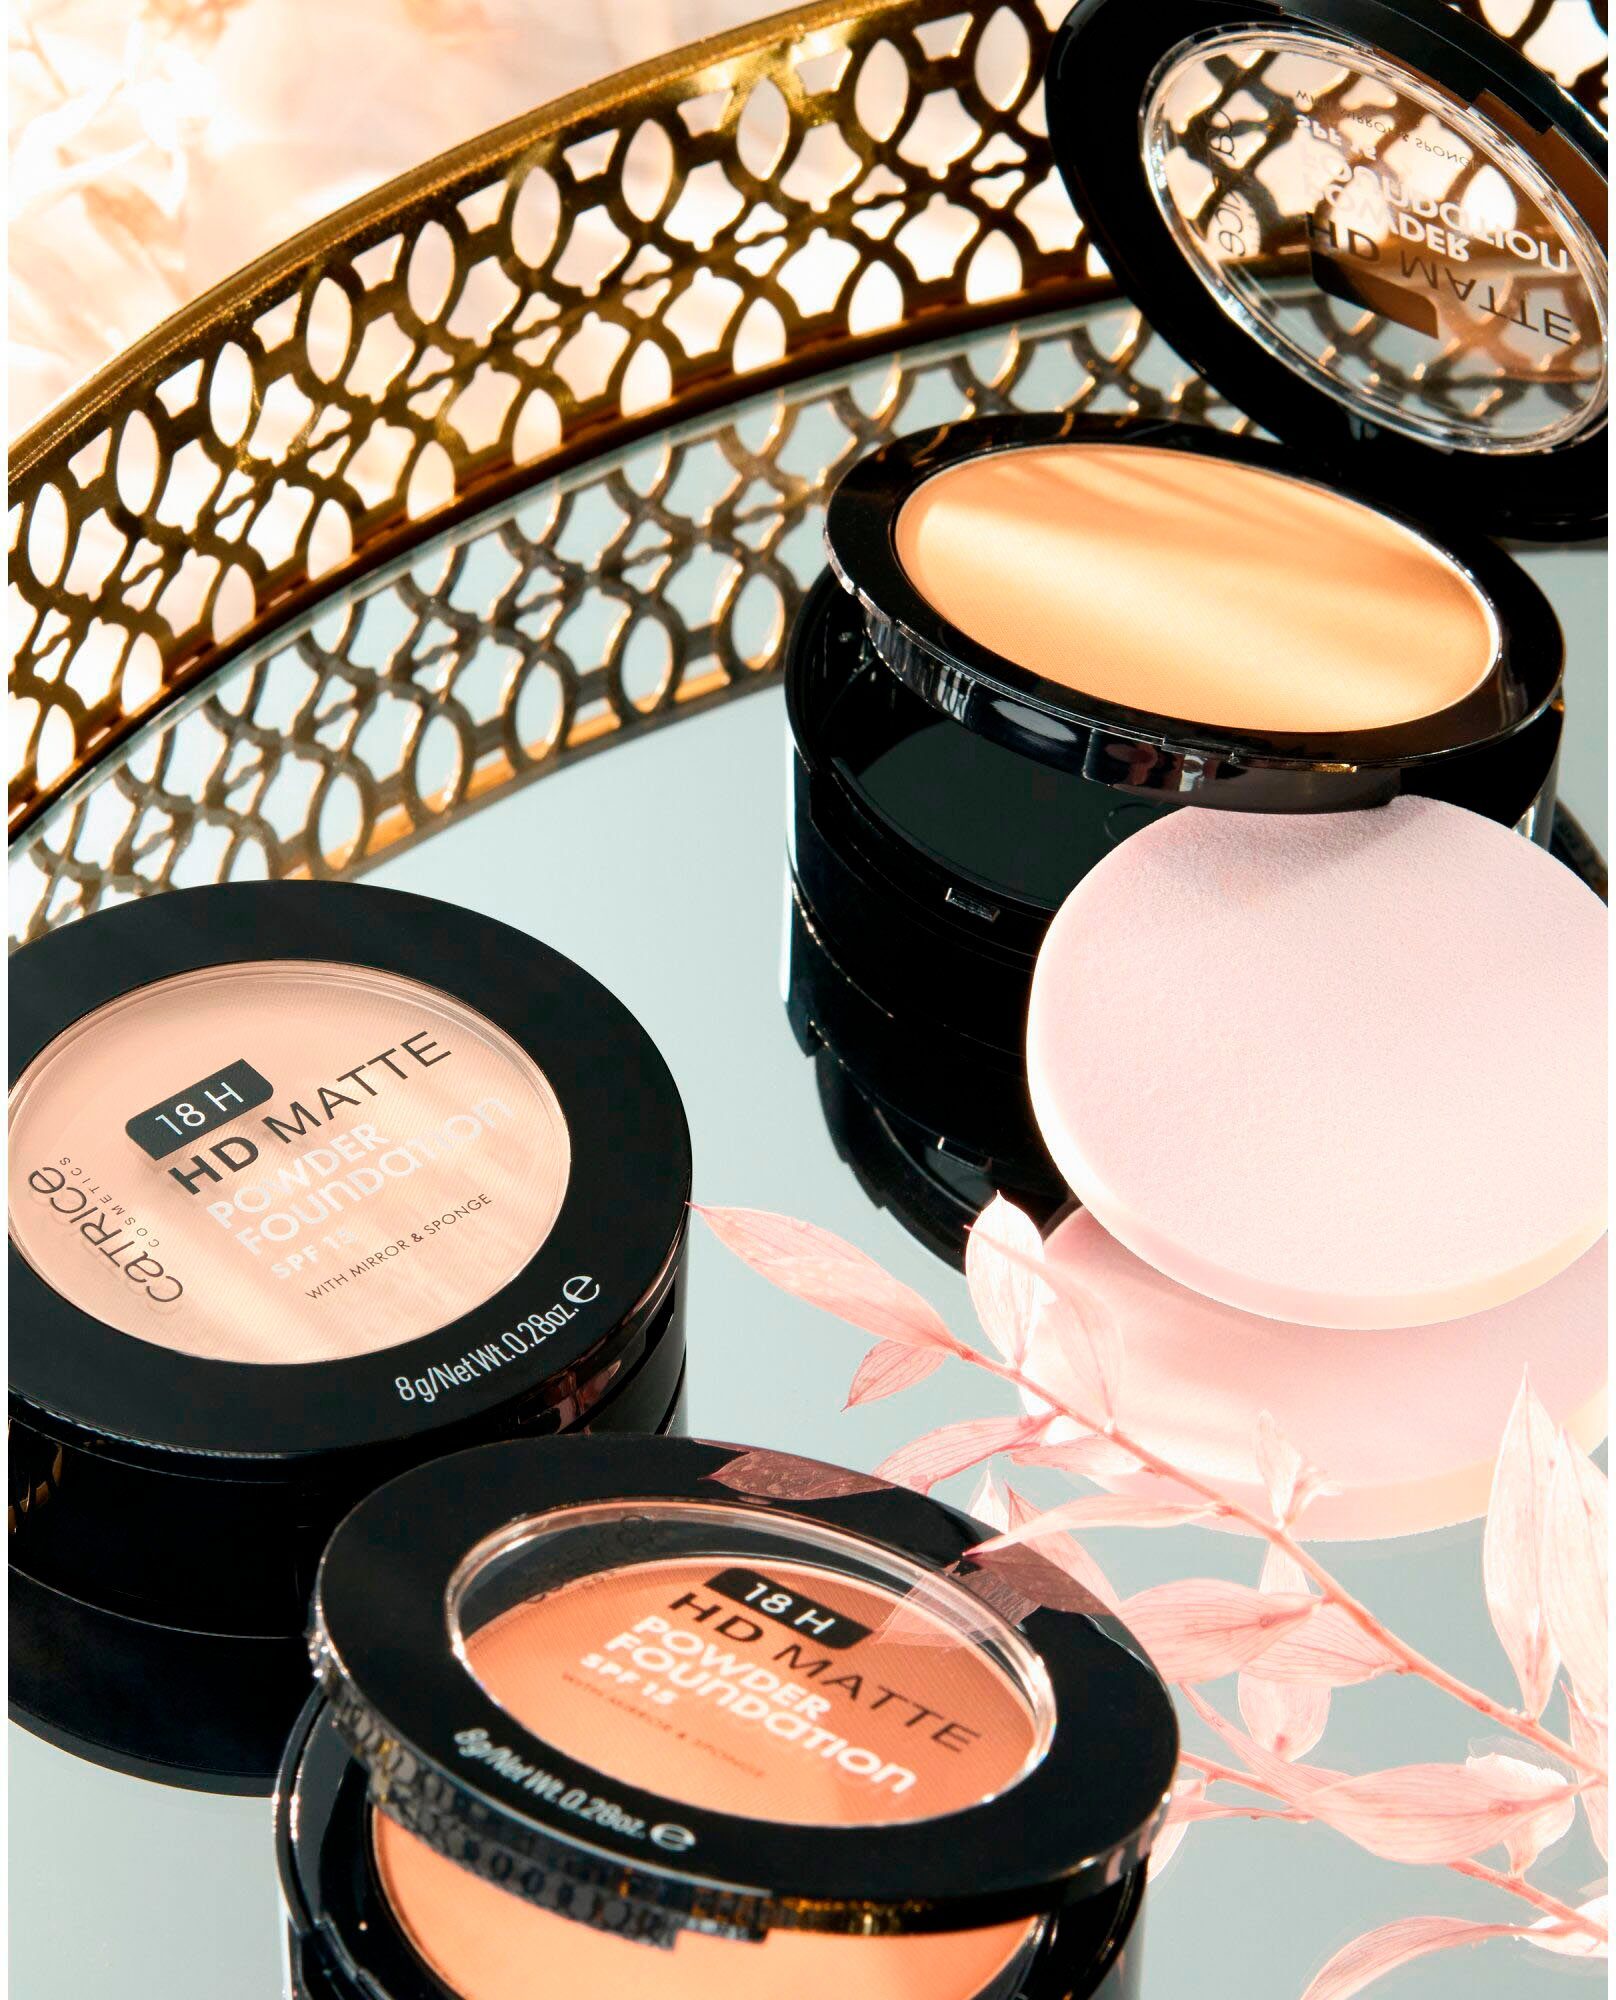 HD Foundation, nude Matte 18H Powder Puder 3-tlg. Catrice 045N